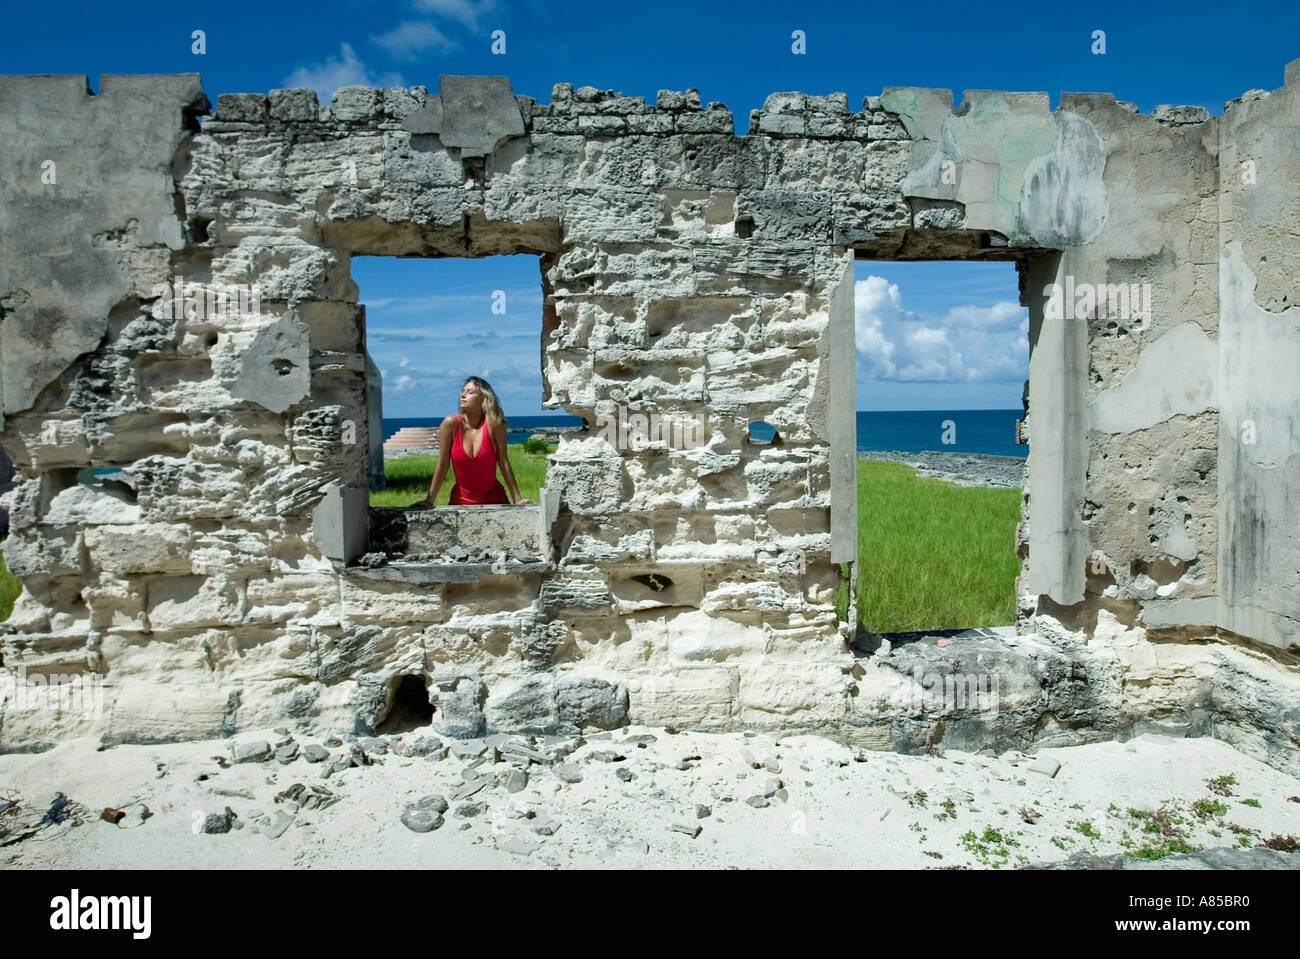 Woman in red pareo in building ruins Great Issac Island Bahamas Stock Photo